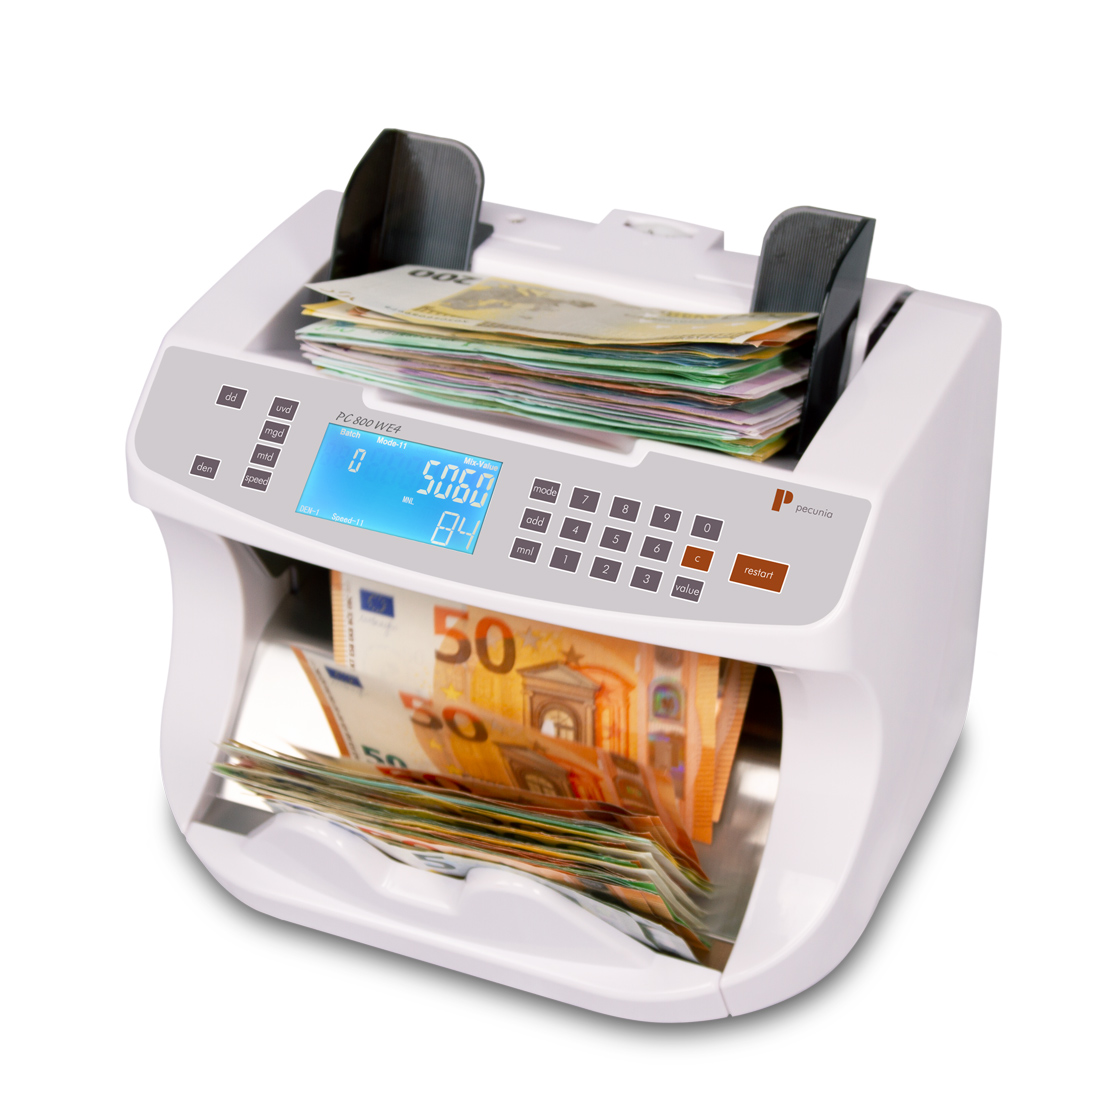 Banknotenzähler Pecunia PC 800 WE4